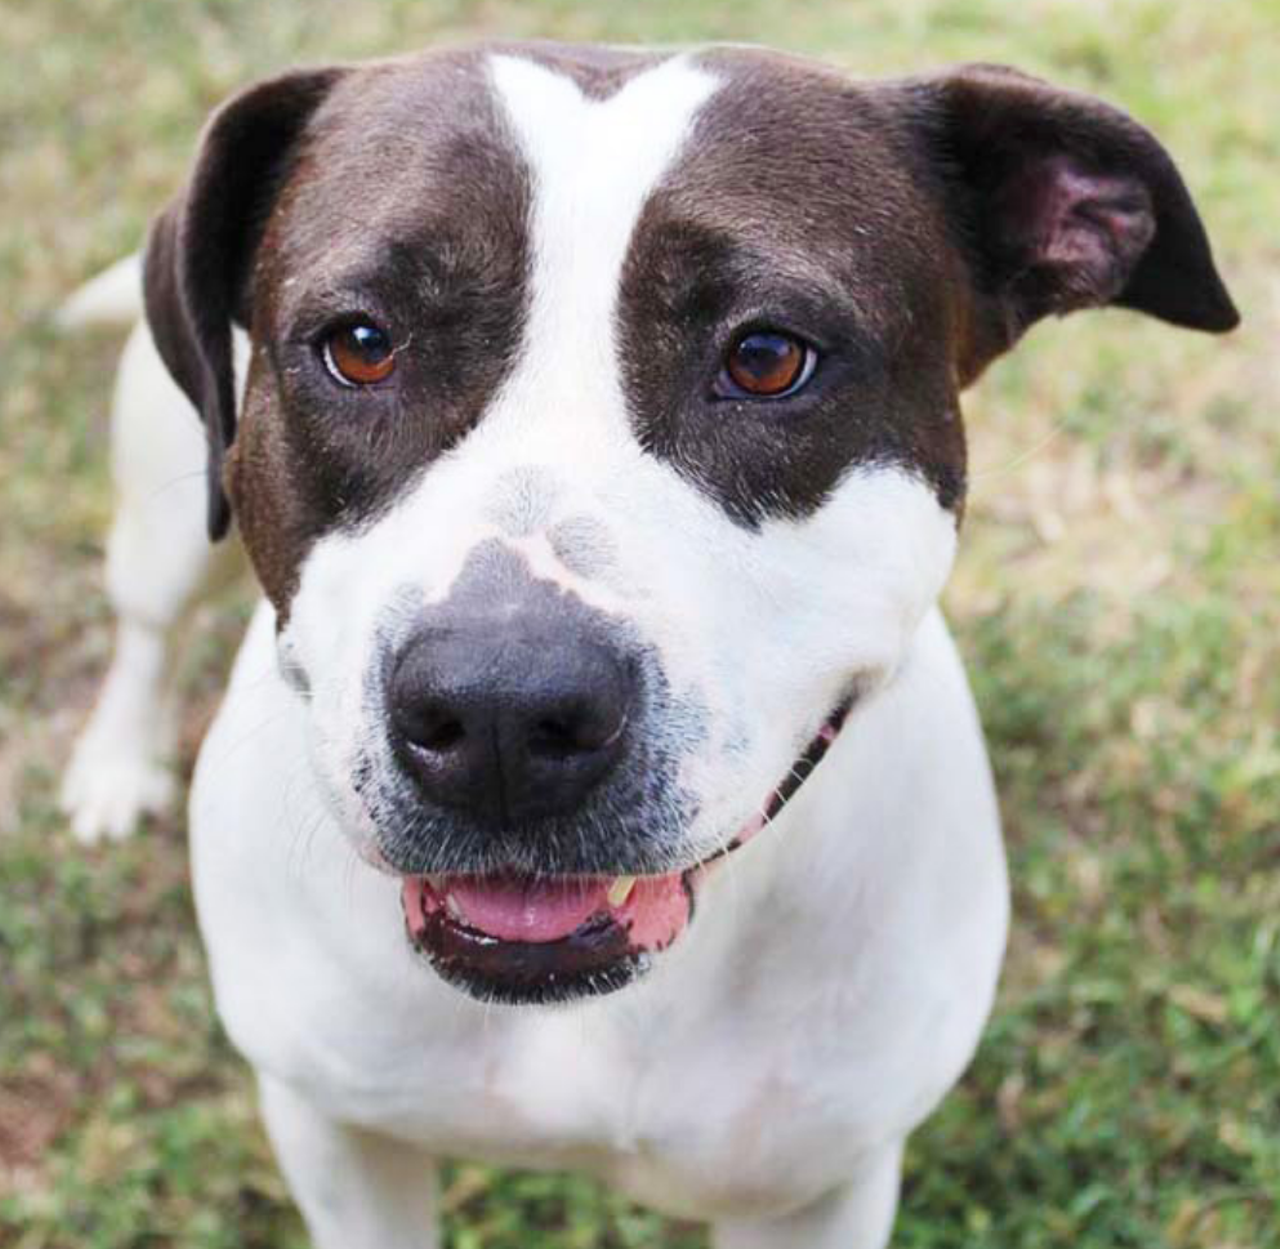 Nix
"Hi there, my name is Nix! I hope you’ll come by and meet me soon because I love to meet new people! I do enjoy a tasty meaty dog treat and going for walks. Everyone says that I am a sweet girl and I hope you’ll think so too."